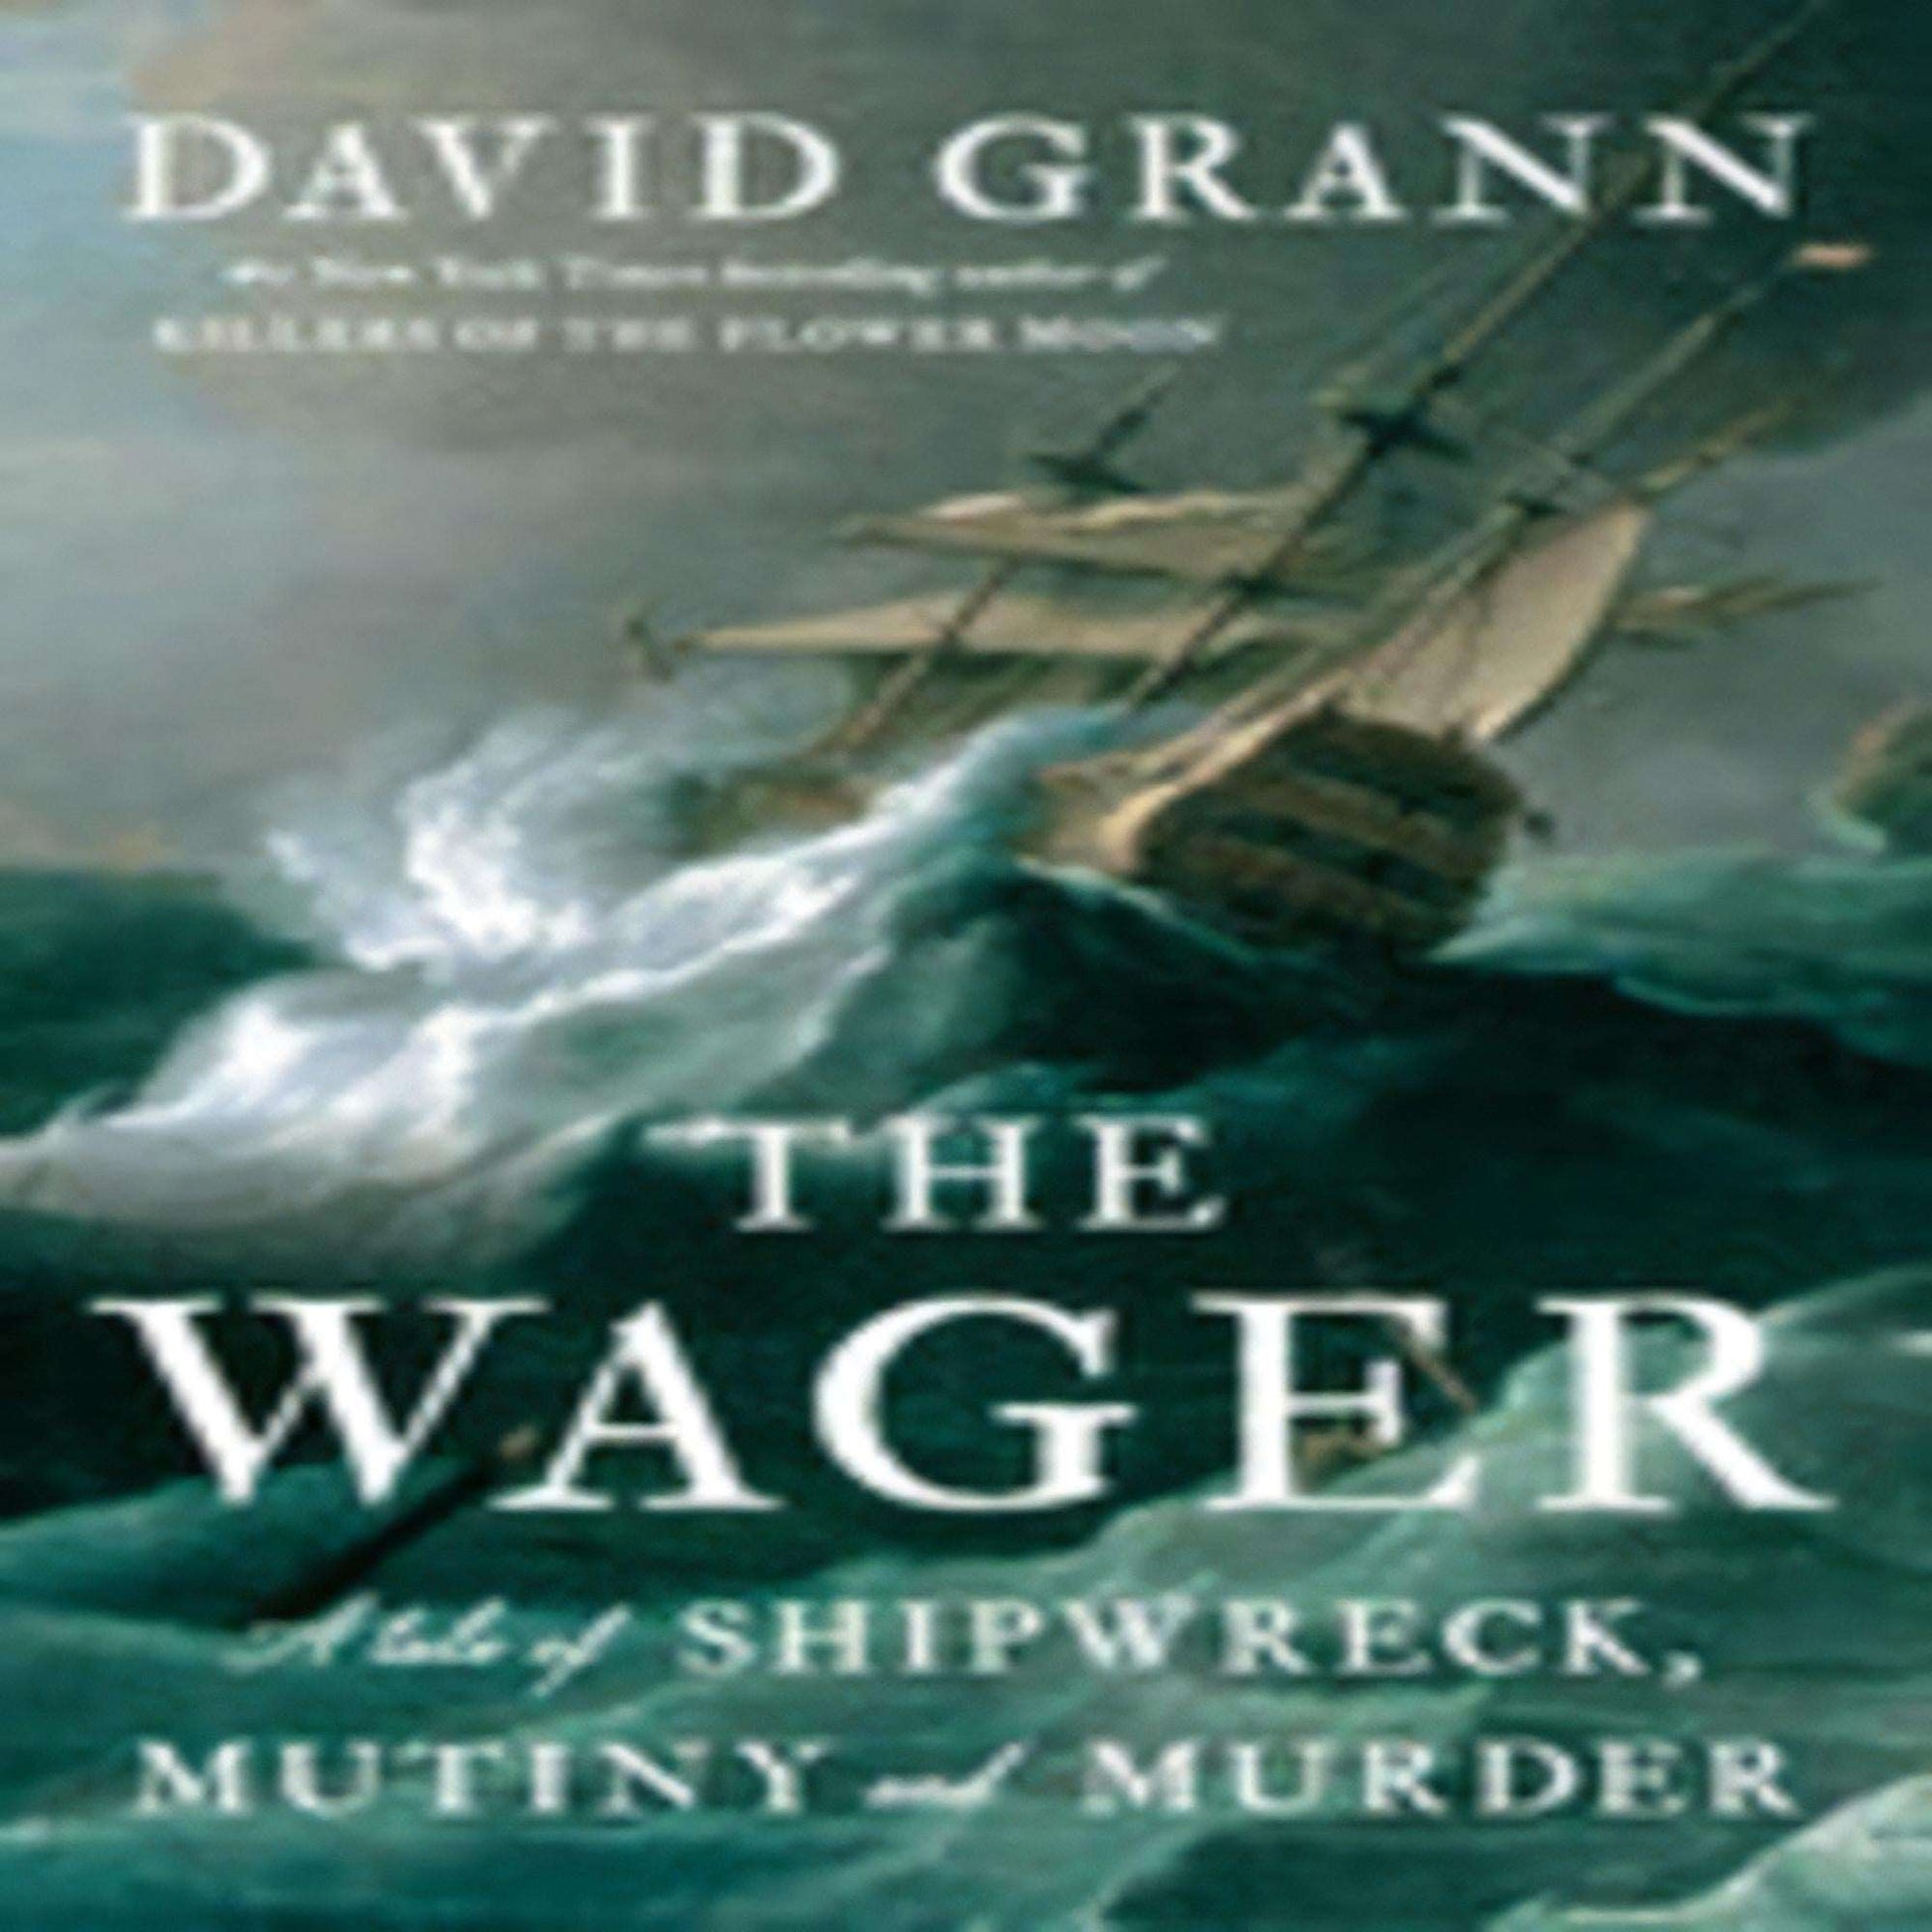 The Wager: A Tale of Shipwreck, Mutiny and Murder275-050623-9780385534260DPGBOOKSTORE.COM. Today's Bestsellers.